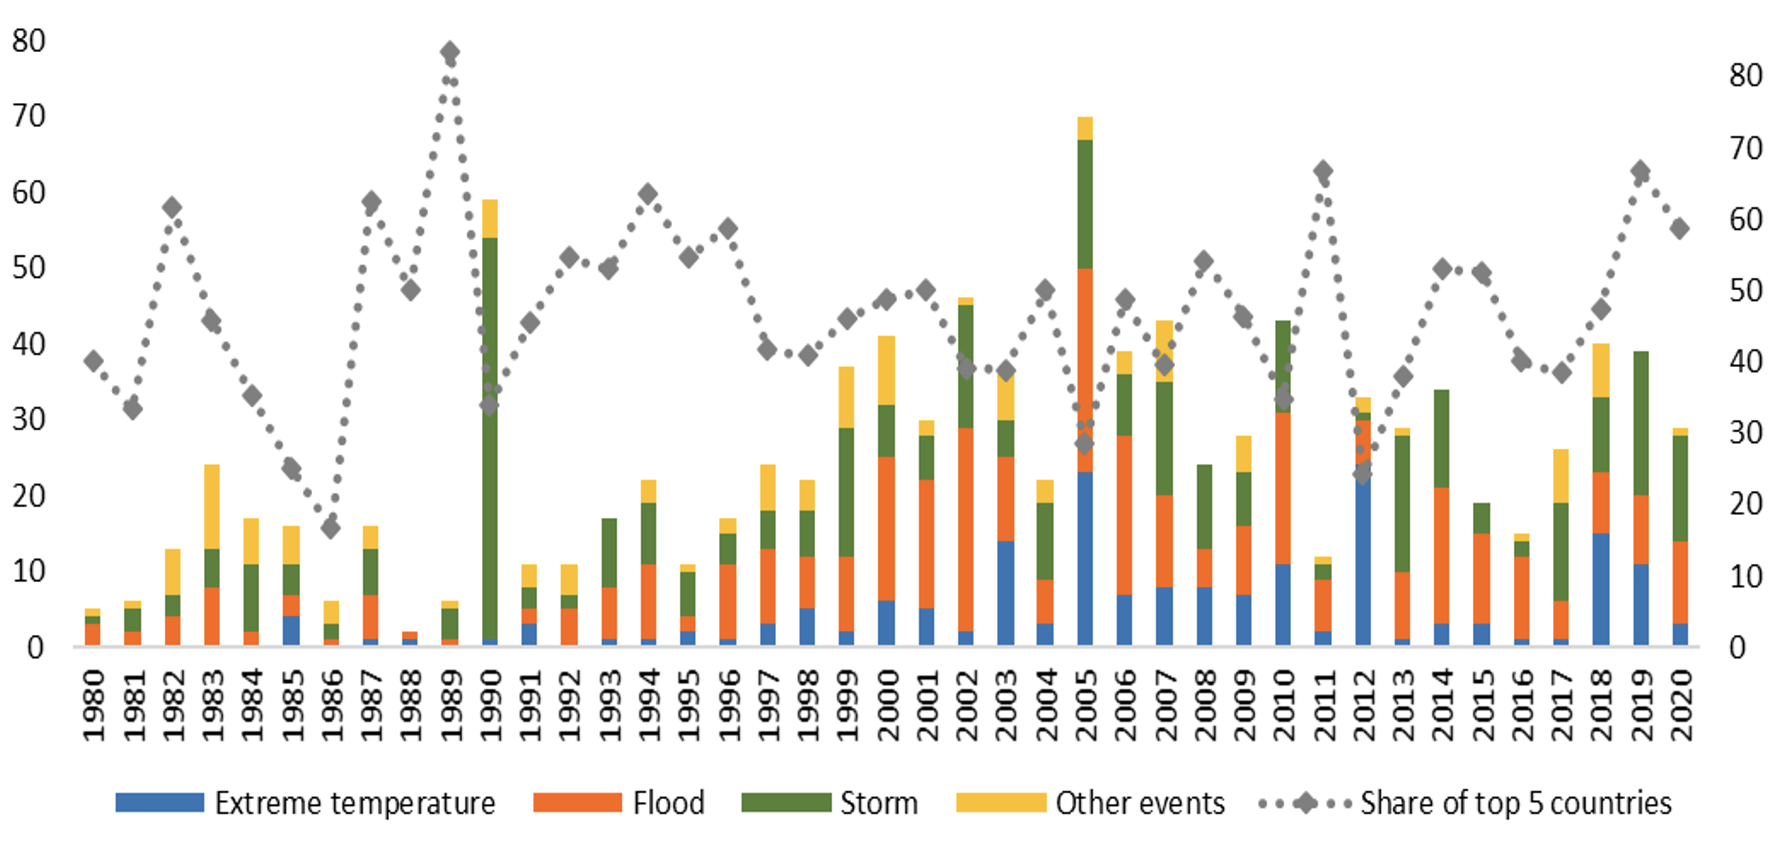 Figure 1 Number of weather events in the EU, by disaster subgroup, 1980-2020